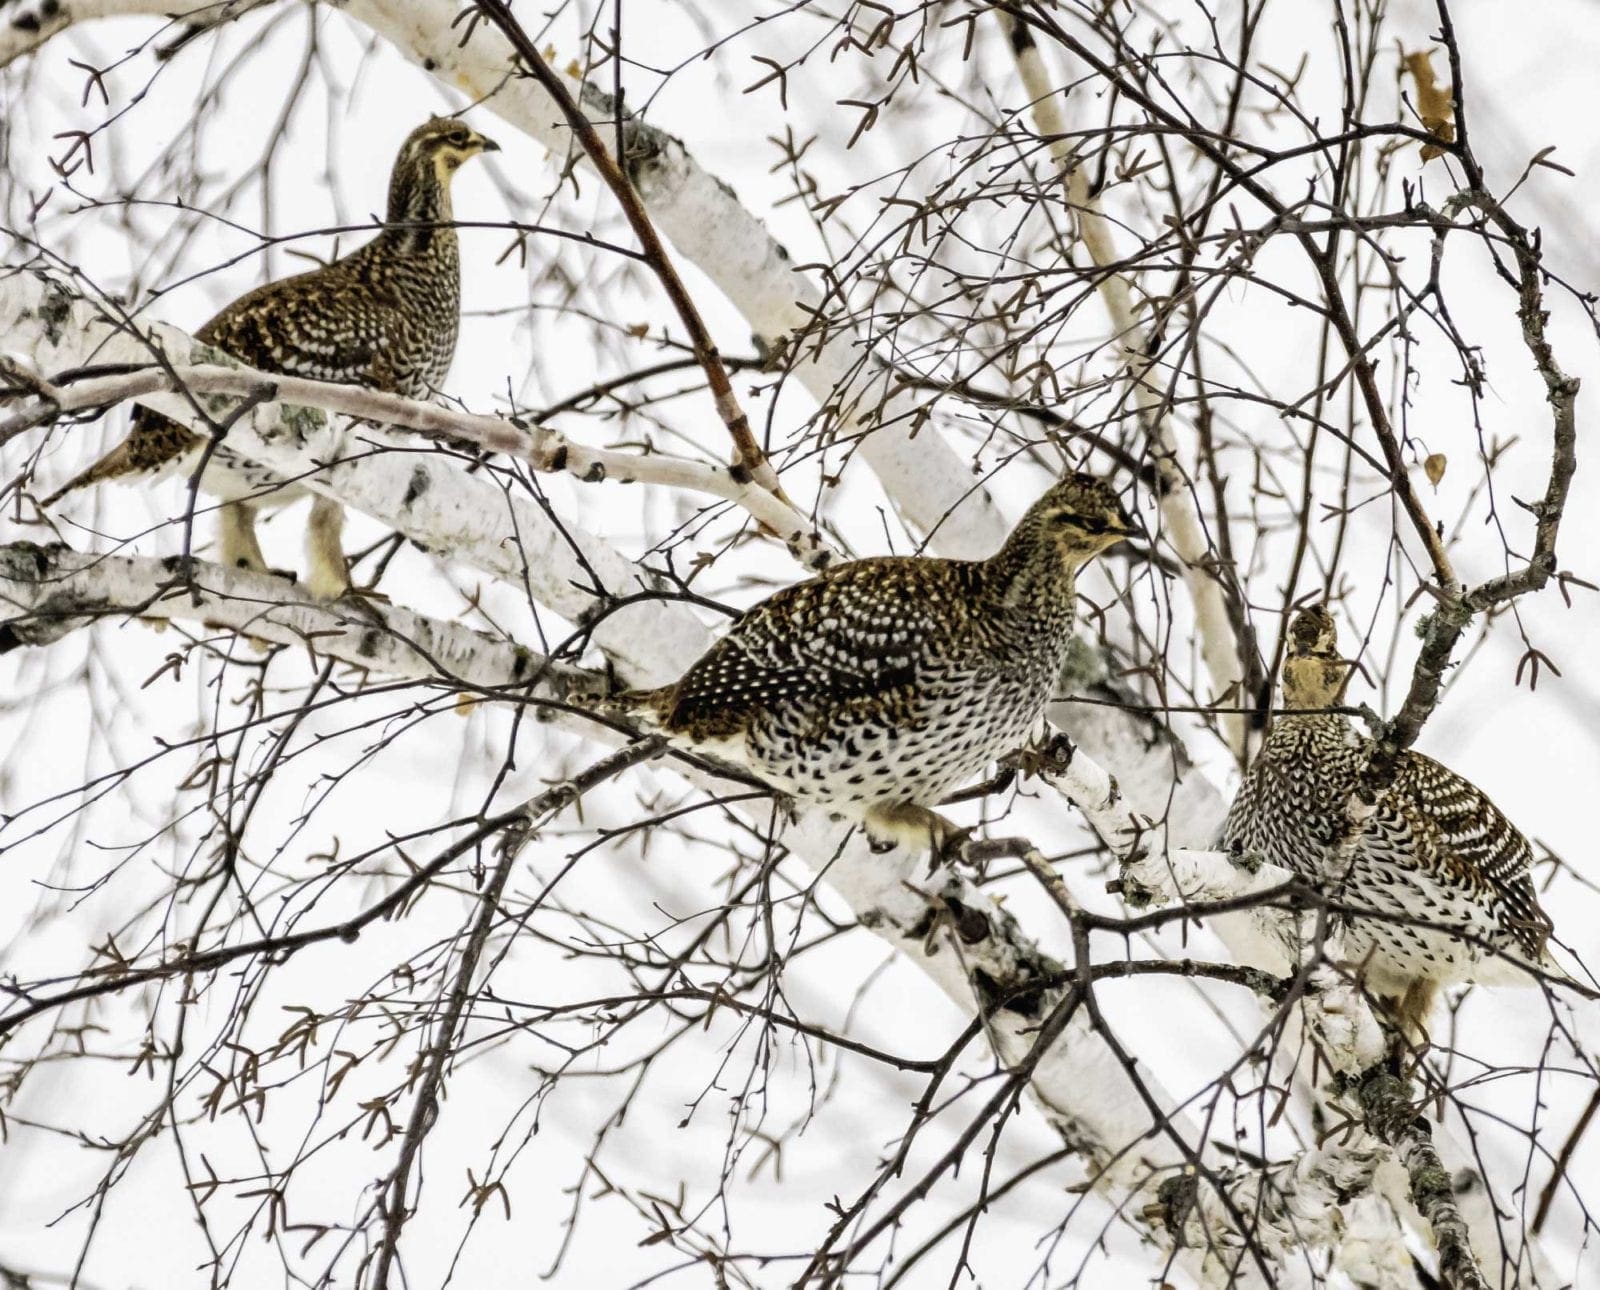 A group of sharp-tailed grouse feed in a tree during cold weather.